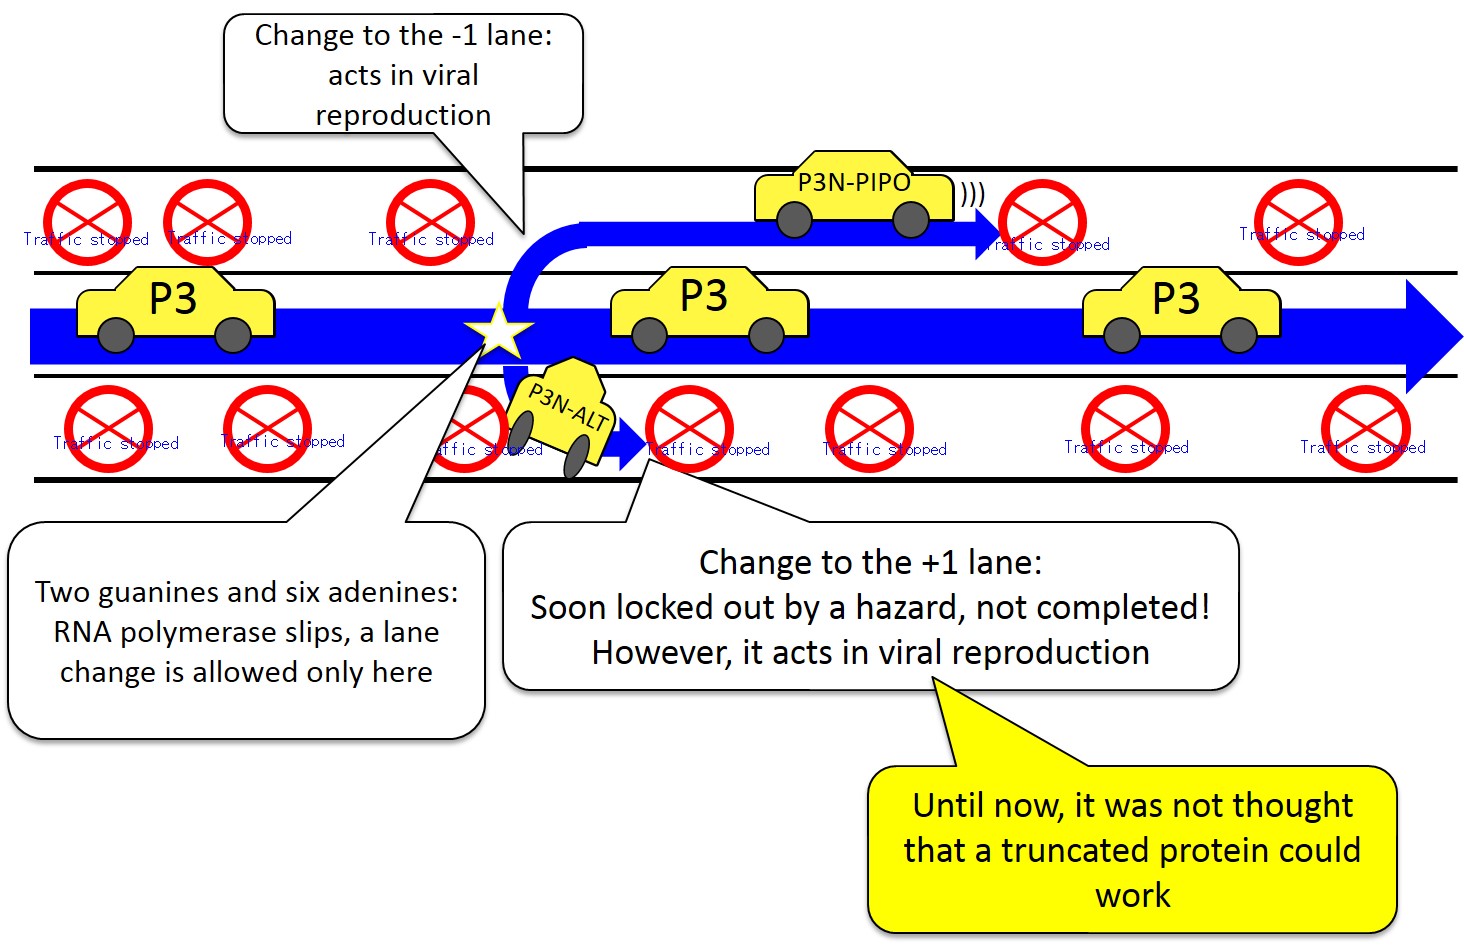 <b>Image of how the truncated gene P3N-ALT is formed</b><br /> Even though it soon stops (the translation into a protein is ended), there is a car that changes lanes to the +1 lane (reading frame) at a base sequence that contains two guanines and six adenines (G2A6) that occurs in the middle of the center line (the large ORF in the viral genome), and a small amount of P3N-ALT protein is produced. This truncated gene P3N-ALT turns out to be necessary for viral infection and reproduction.